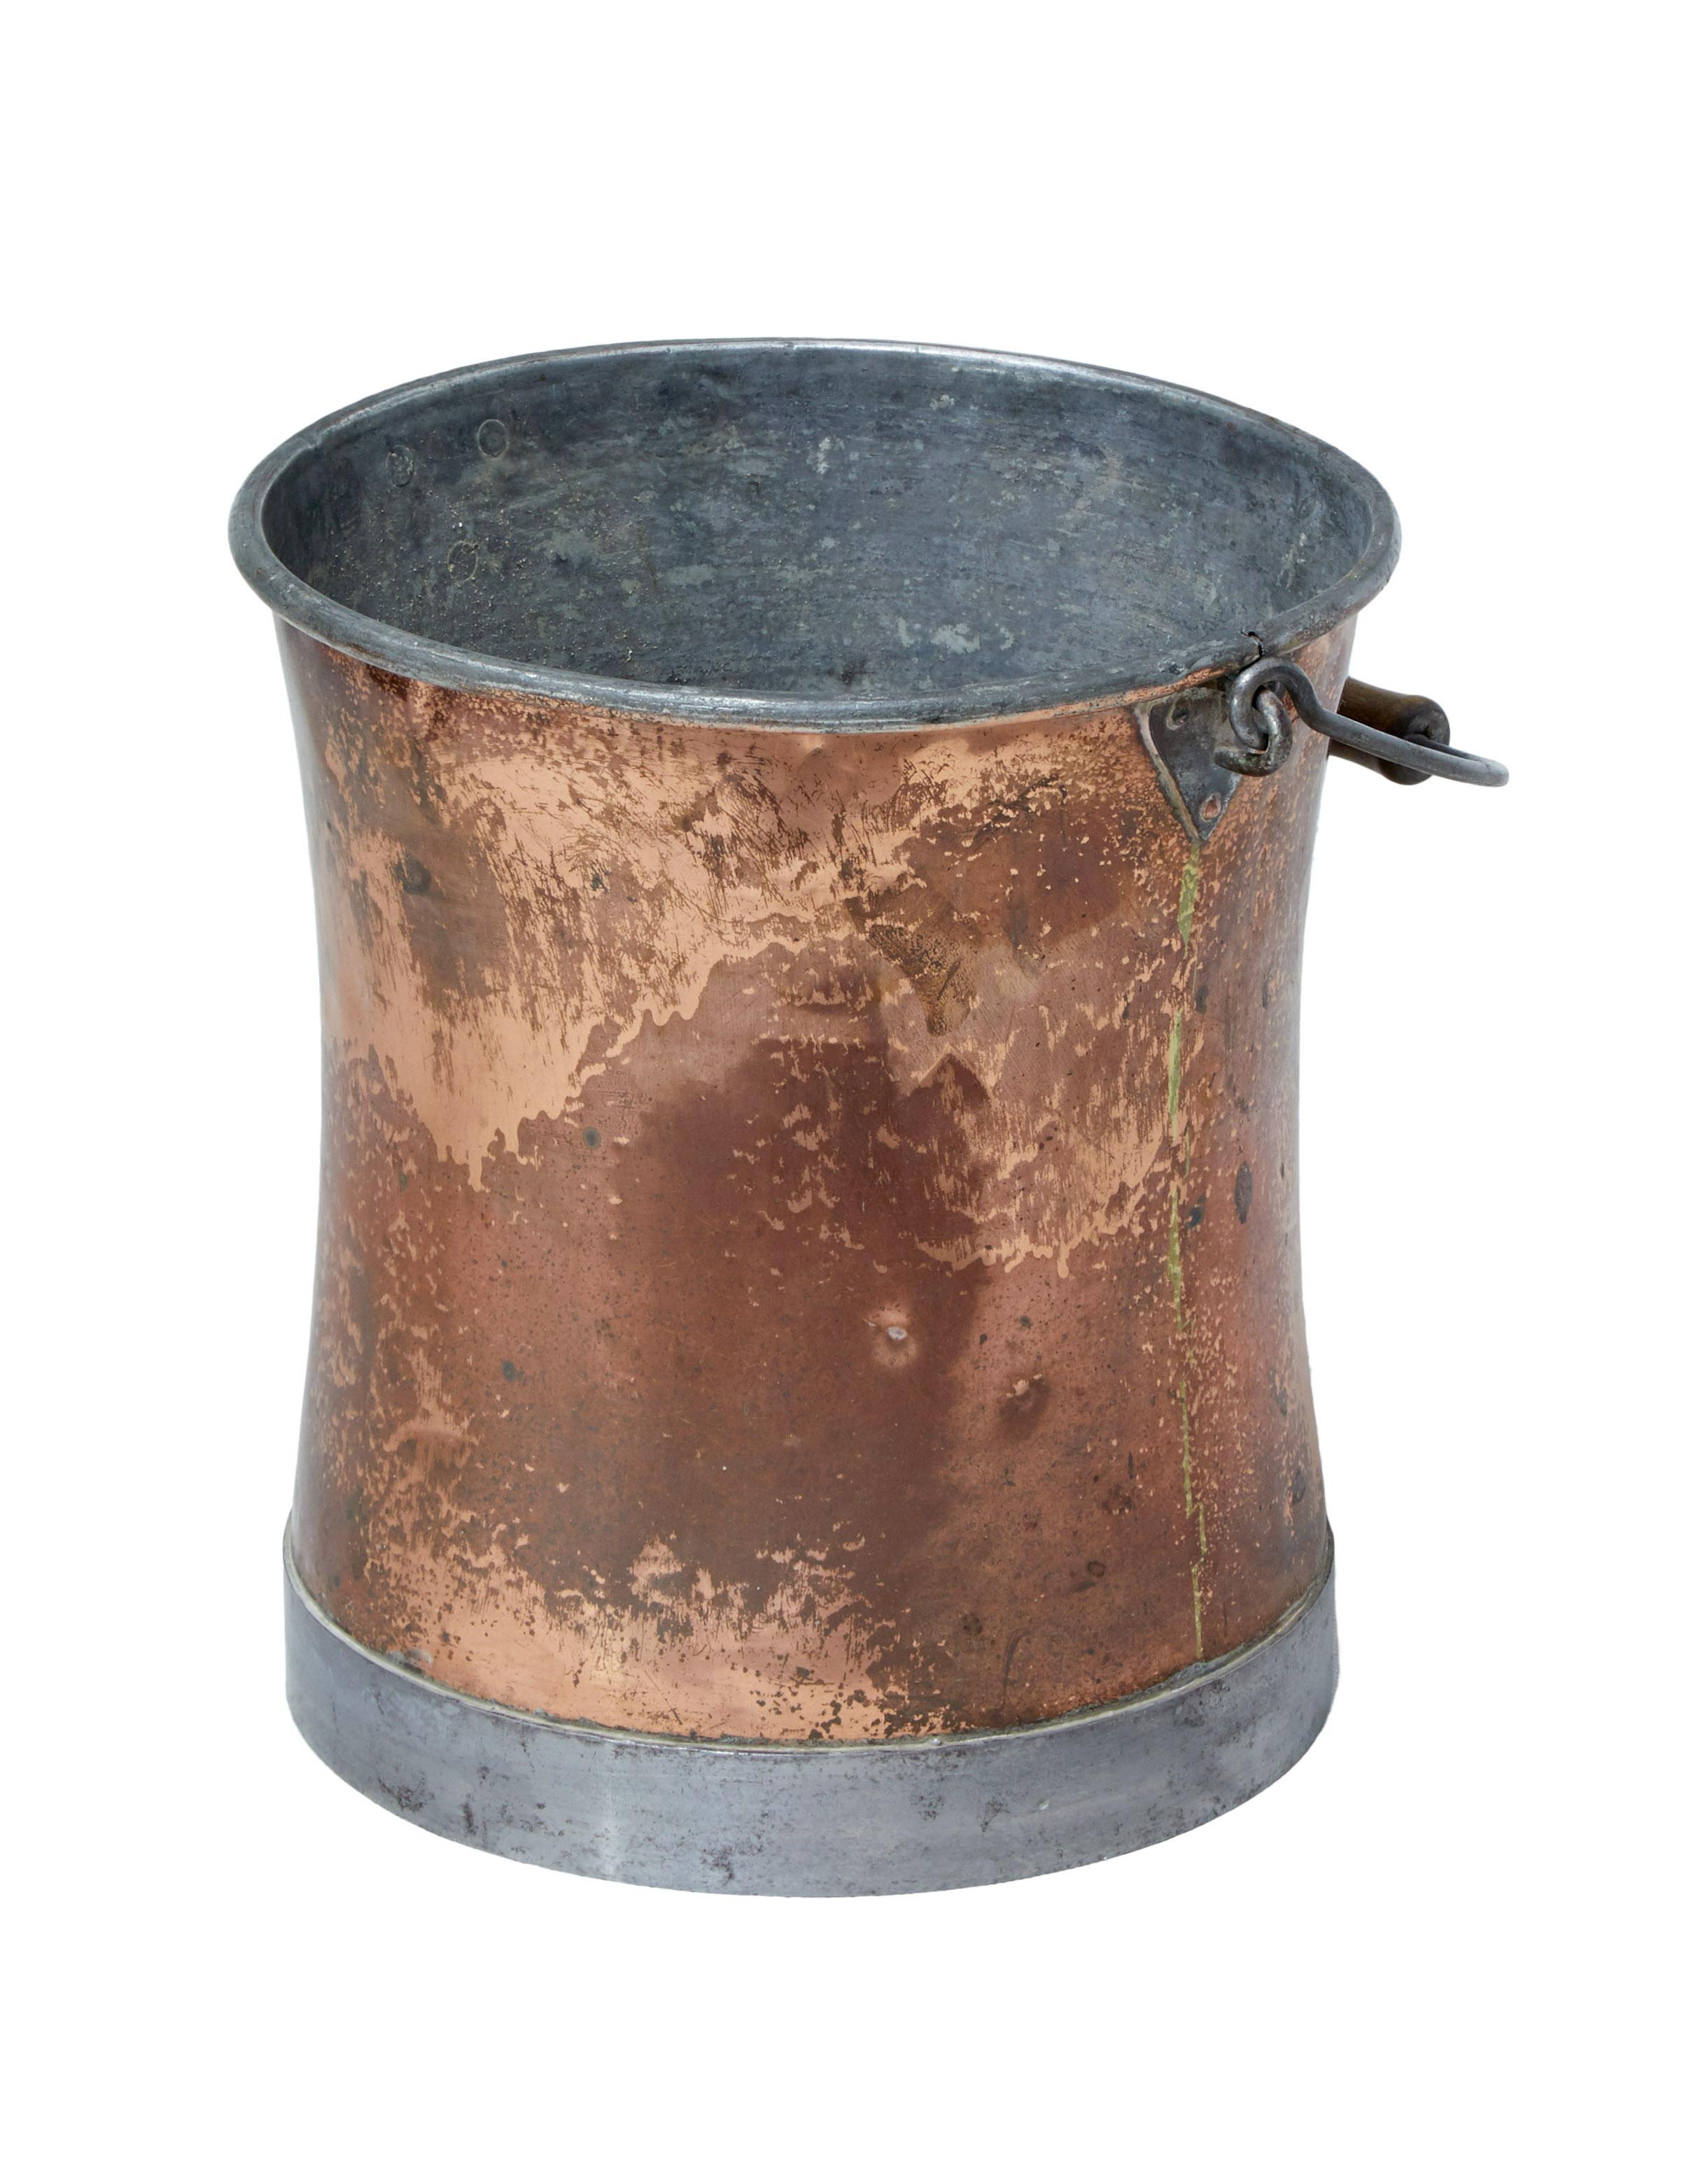 Late 19th century Arts & Crafts copper bucket, circa 1890.

Steel and copper bucket. Nicely shaped compared to the norm. Complete with handle and original wooden grip.

Ideal use for today as a waste paper basket or kindling bin.

Expected